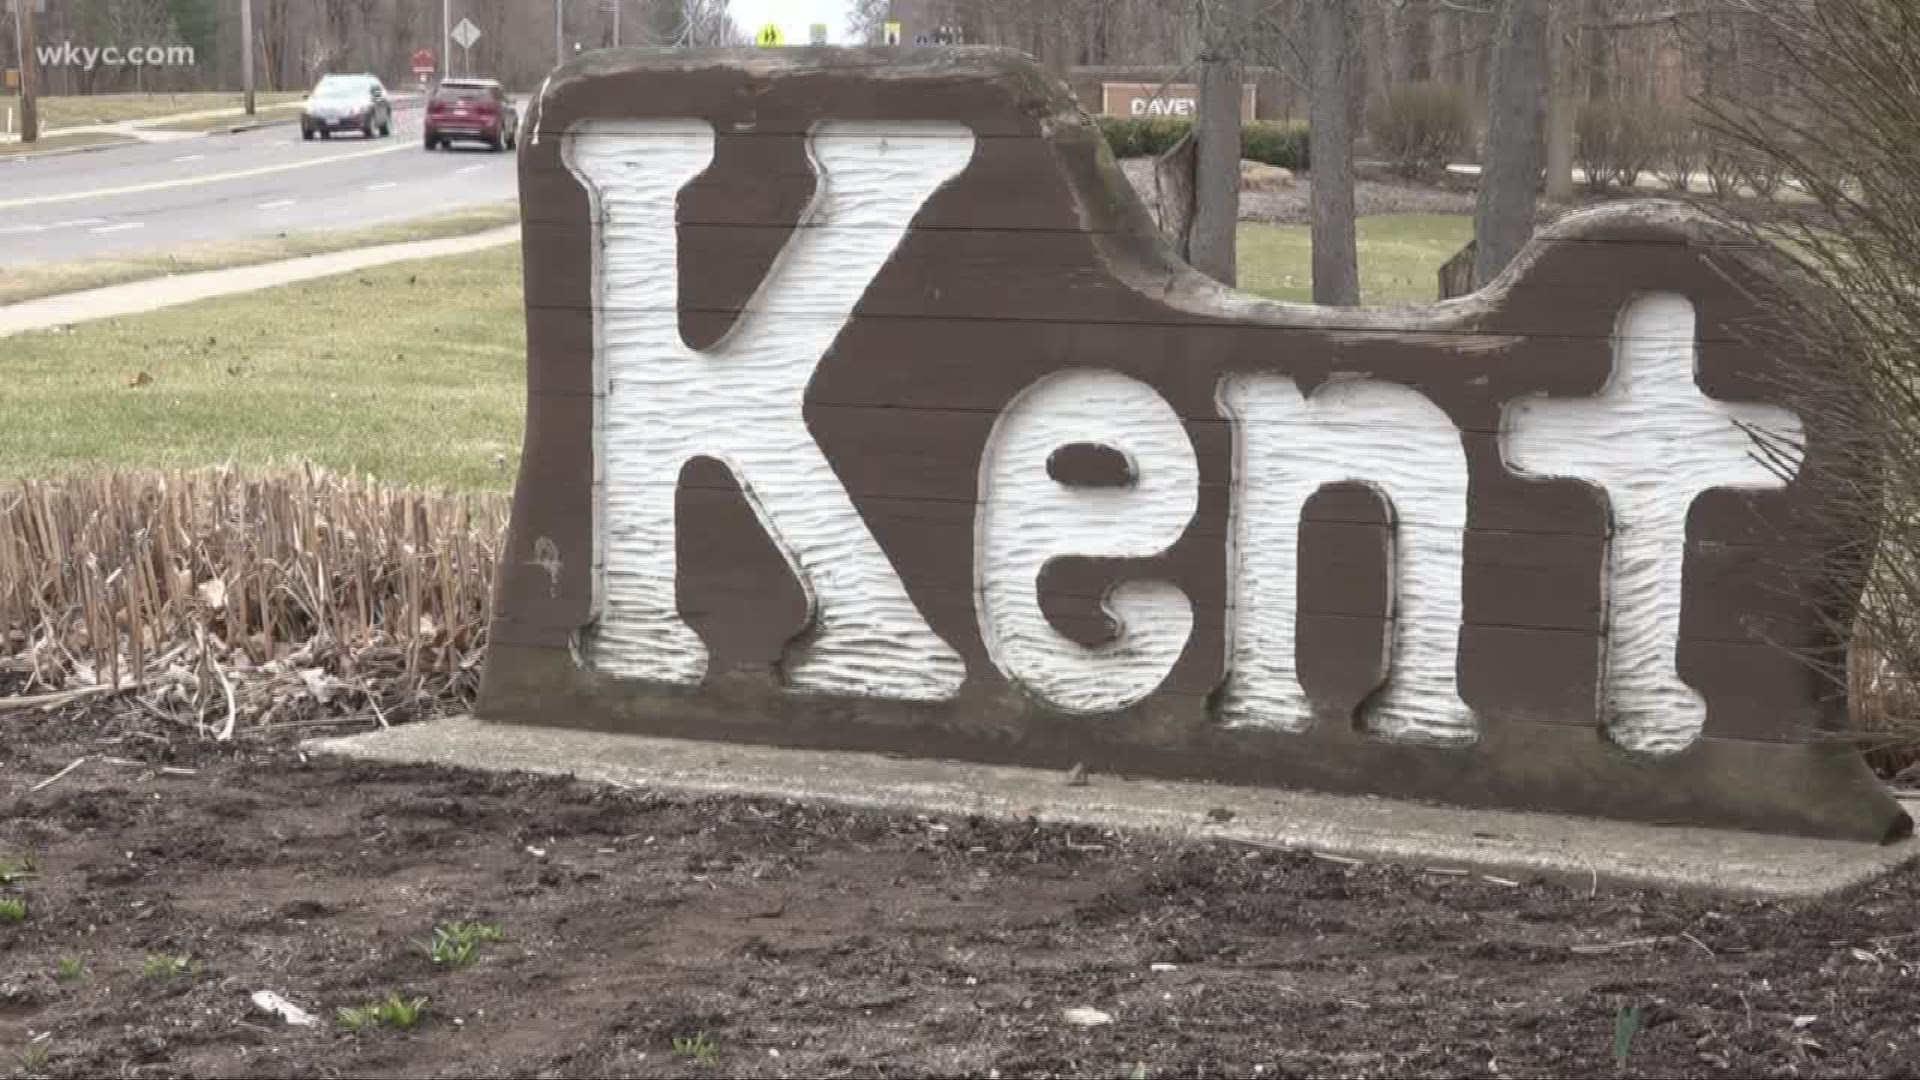 April 8, 2019: WKYC's Danielle Wiggins takes us on a tour of the coolest places to visit in Kent.